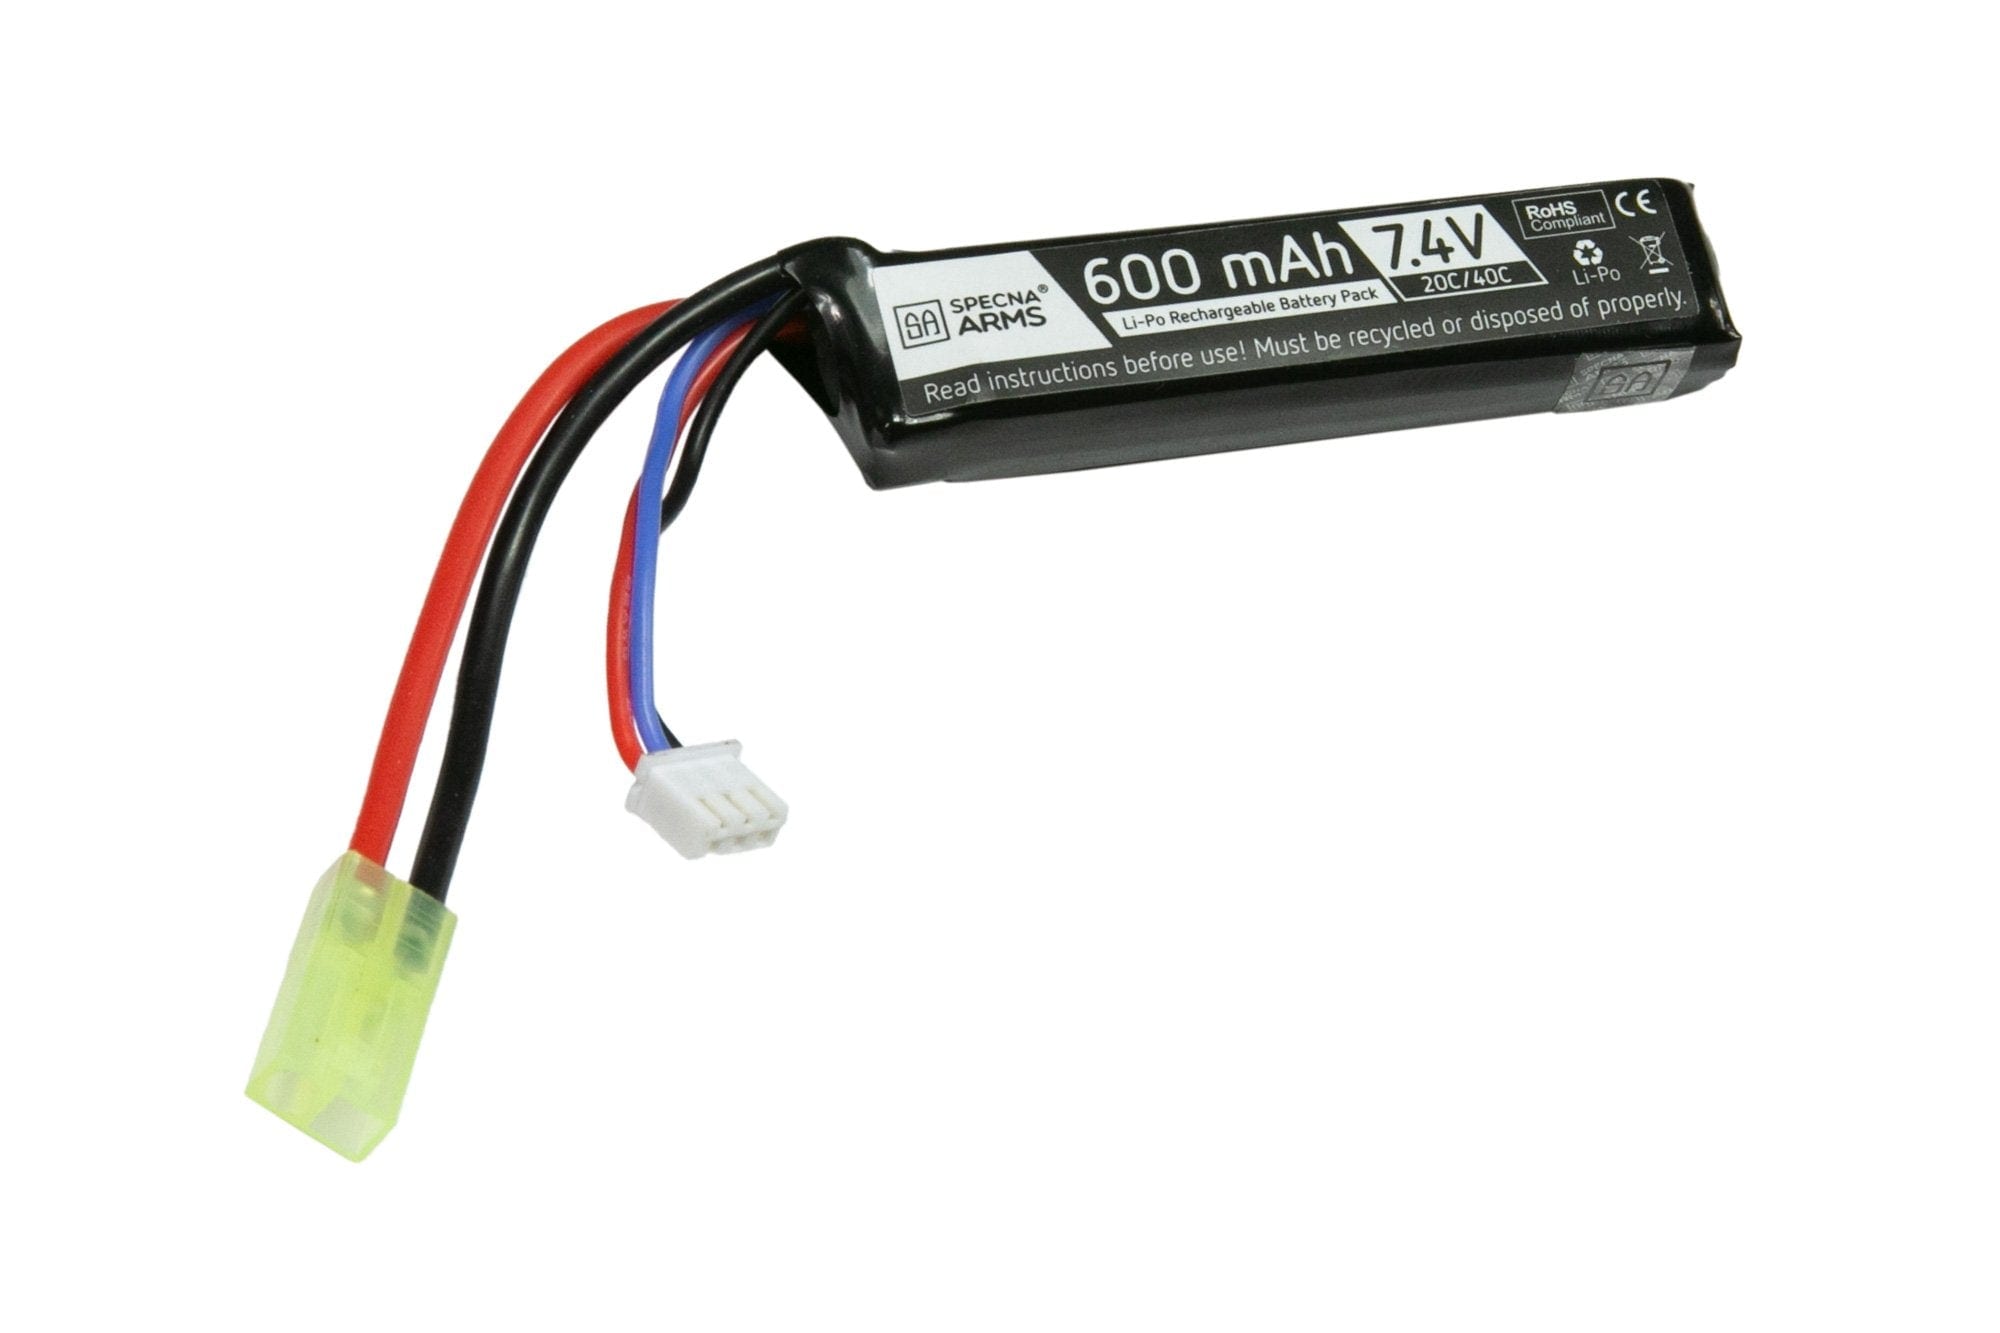 LiPo 11,1V 600mAh 20/40C Battery for PDW – Tamiya mini by Specna Arms on Airsoft Mania Europe